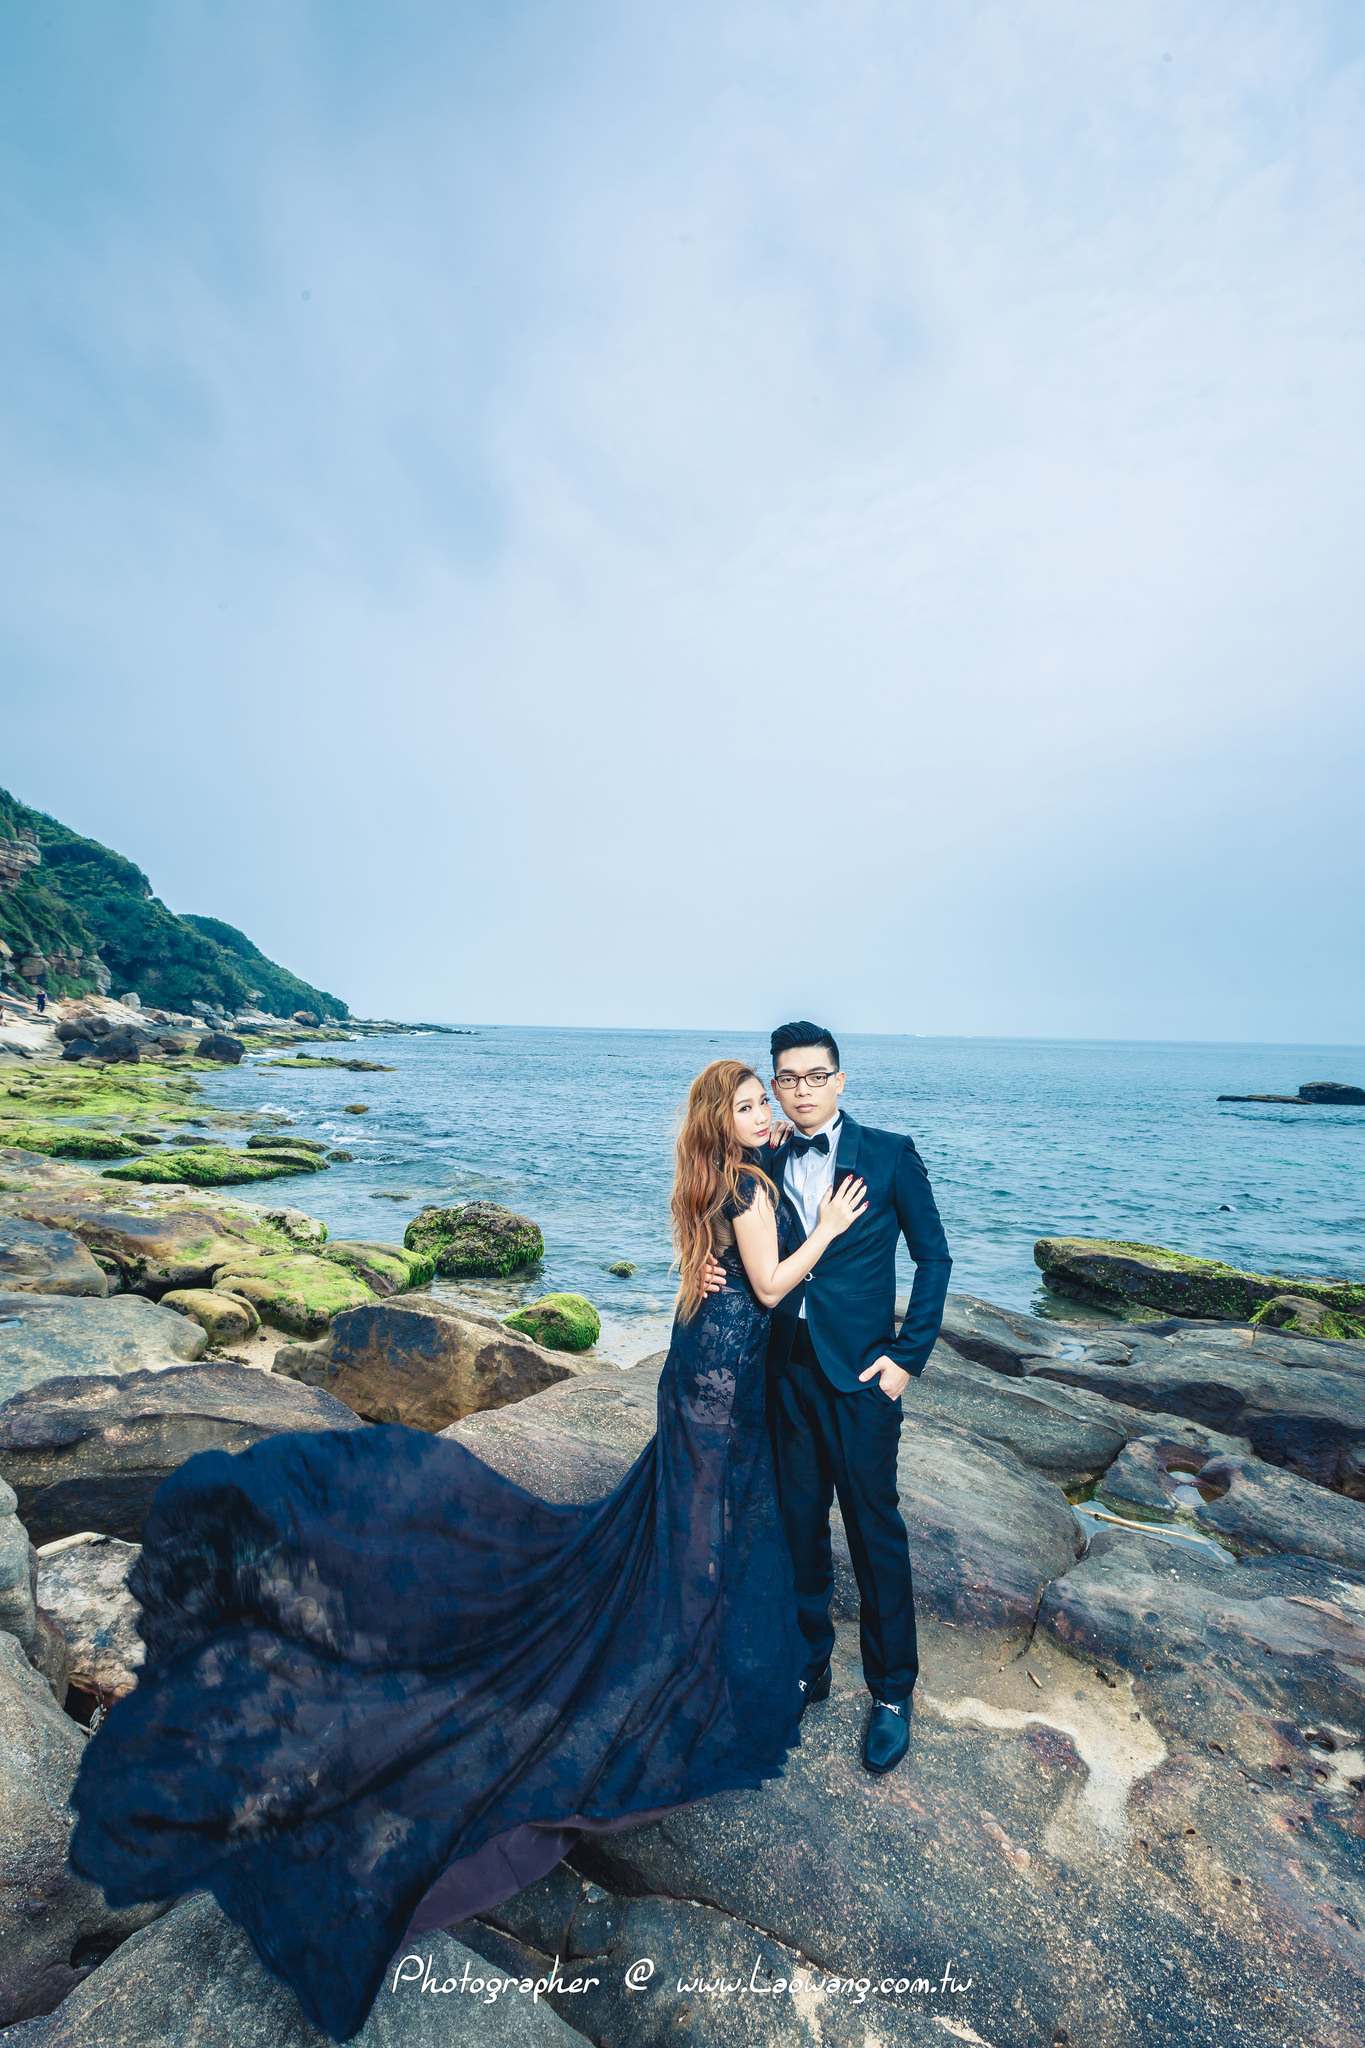 wedding photography6 The Best Wedding Photography Ideas by Lao Wang